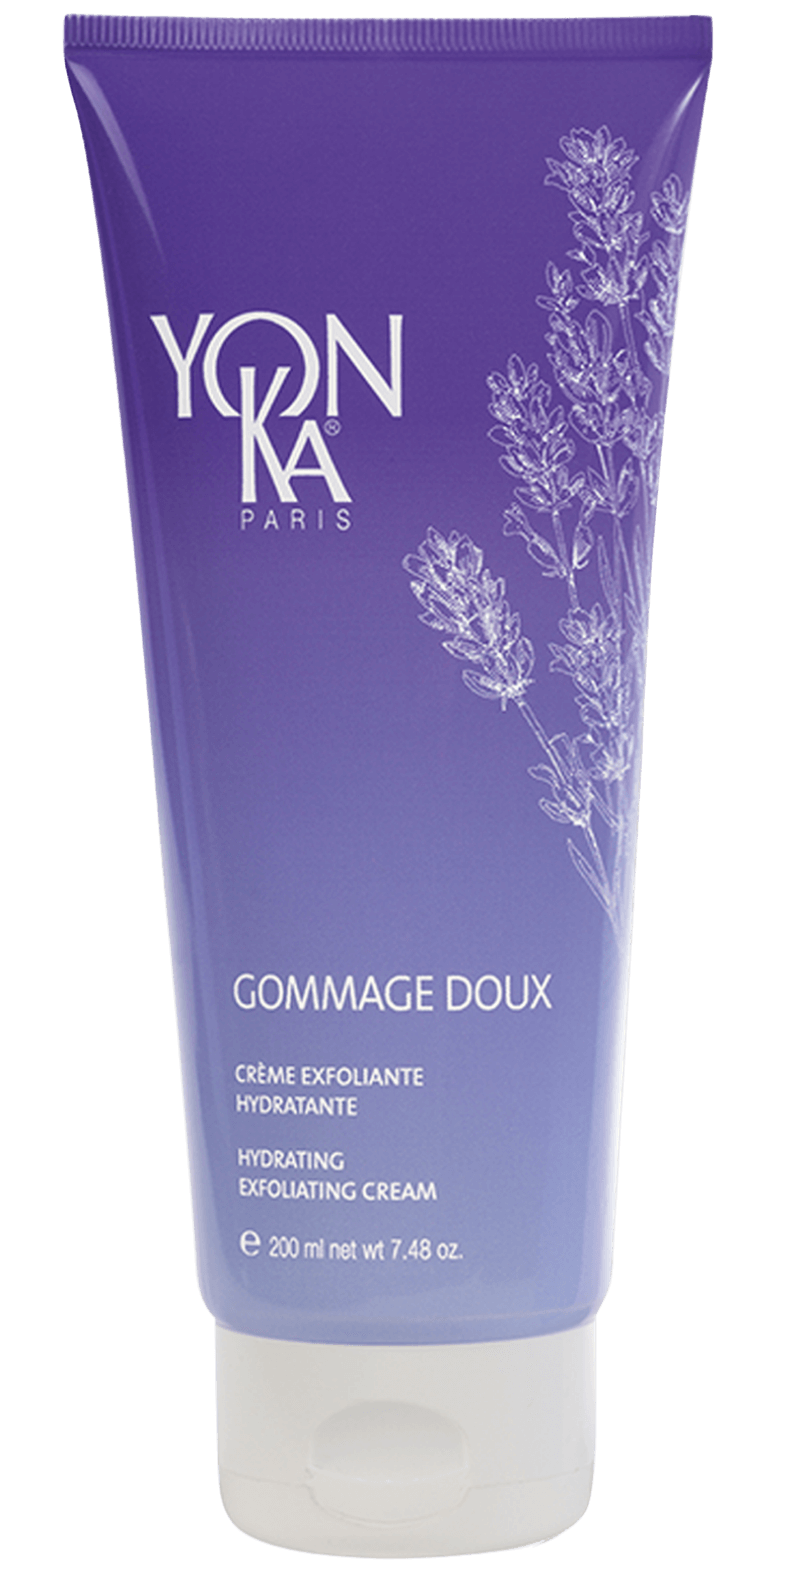 's Yonka Gommage Doux Lavender - Bellini's Skin and Parfumerie 